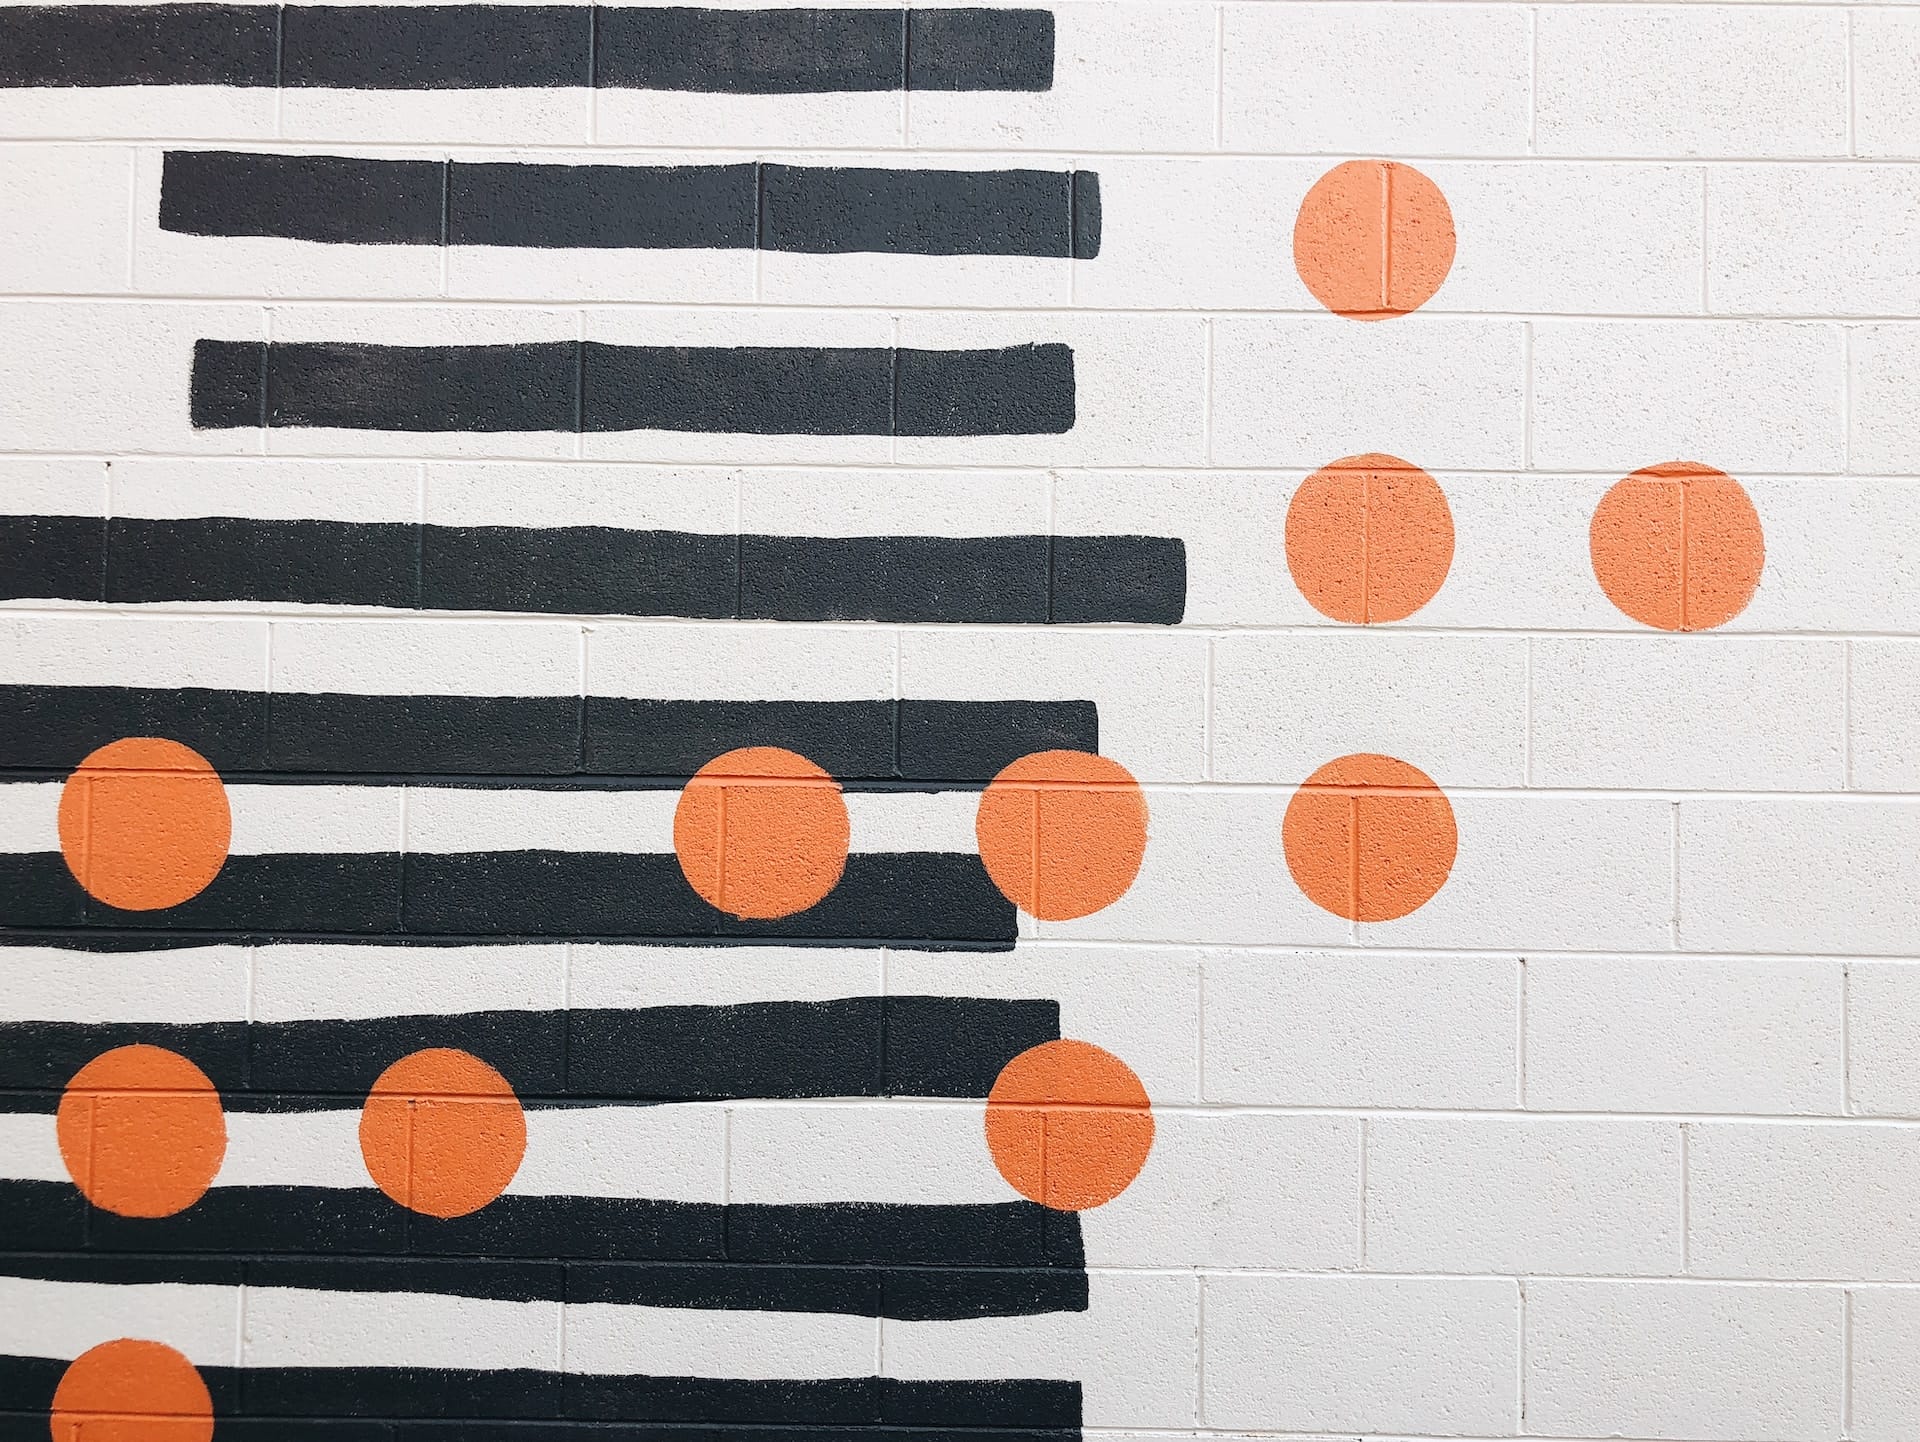 A mural composed of black rectangles and vibrant, orange circles. The abstract design symbolizes the concept of connecting the dots in free association, where each shape represents an idea or thought leading to deeper subconscious insights.